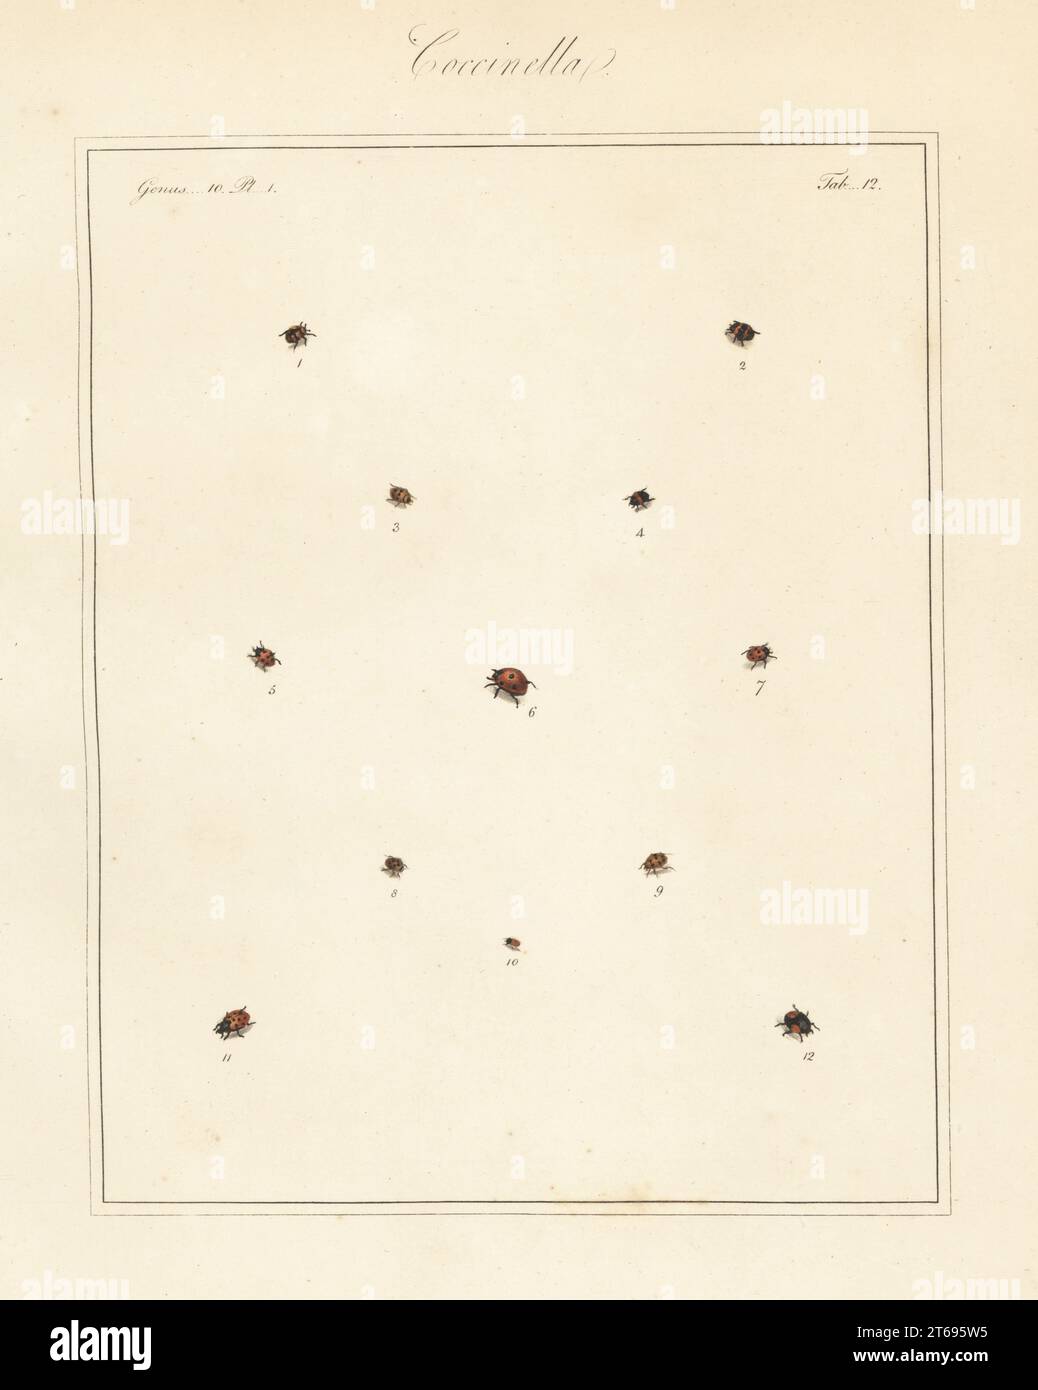 Species of ladybirds or ladybugs. Ten-spotted ladybird, Adalia decempunctata 1,2, 11-spotted ladybird, Coccinella undecimpunctata 3,5,7, kidney-spot ladybird, Chilocorus renipustulatus 4, seven-spot, Coccinella septempunctata 6, 24-spot, Subcoccinella vigintiquatuorpunctata 8, 13-spot, Hippodamia tredecimpunctata 9, water scavenger, Cercyon unipunctatus 10, and pine ladybird, Exochomus quadripustulatus 12. Handcoloured copperplate engraving from Thomas Martyns The English Entomologist, Exhibiting all the Coleopterous Insects found in England, Academy for Illustrating and Painting Natural Histo Stock Photo